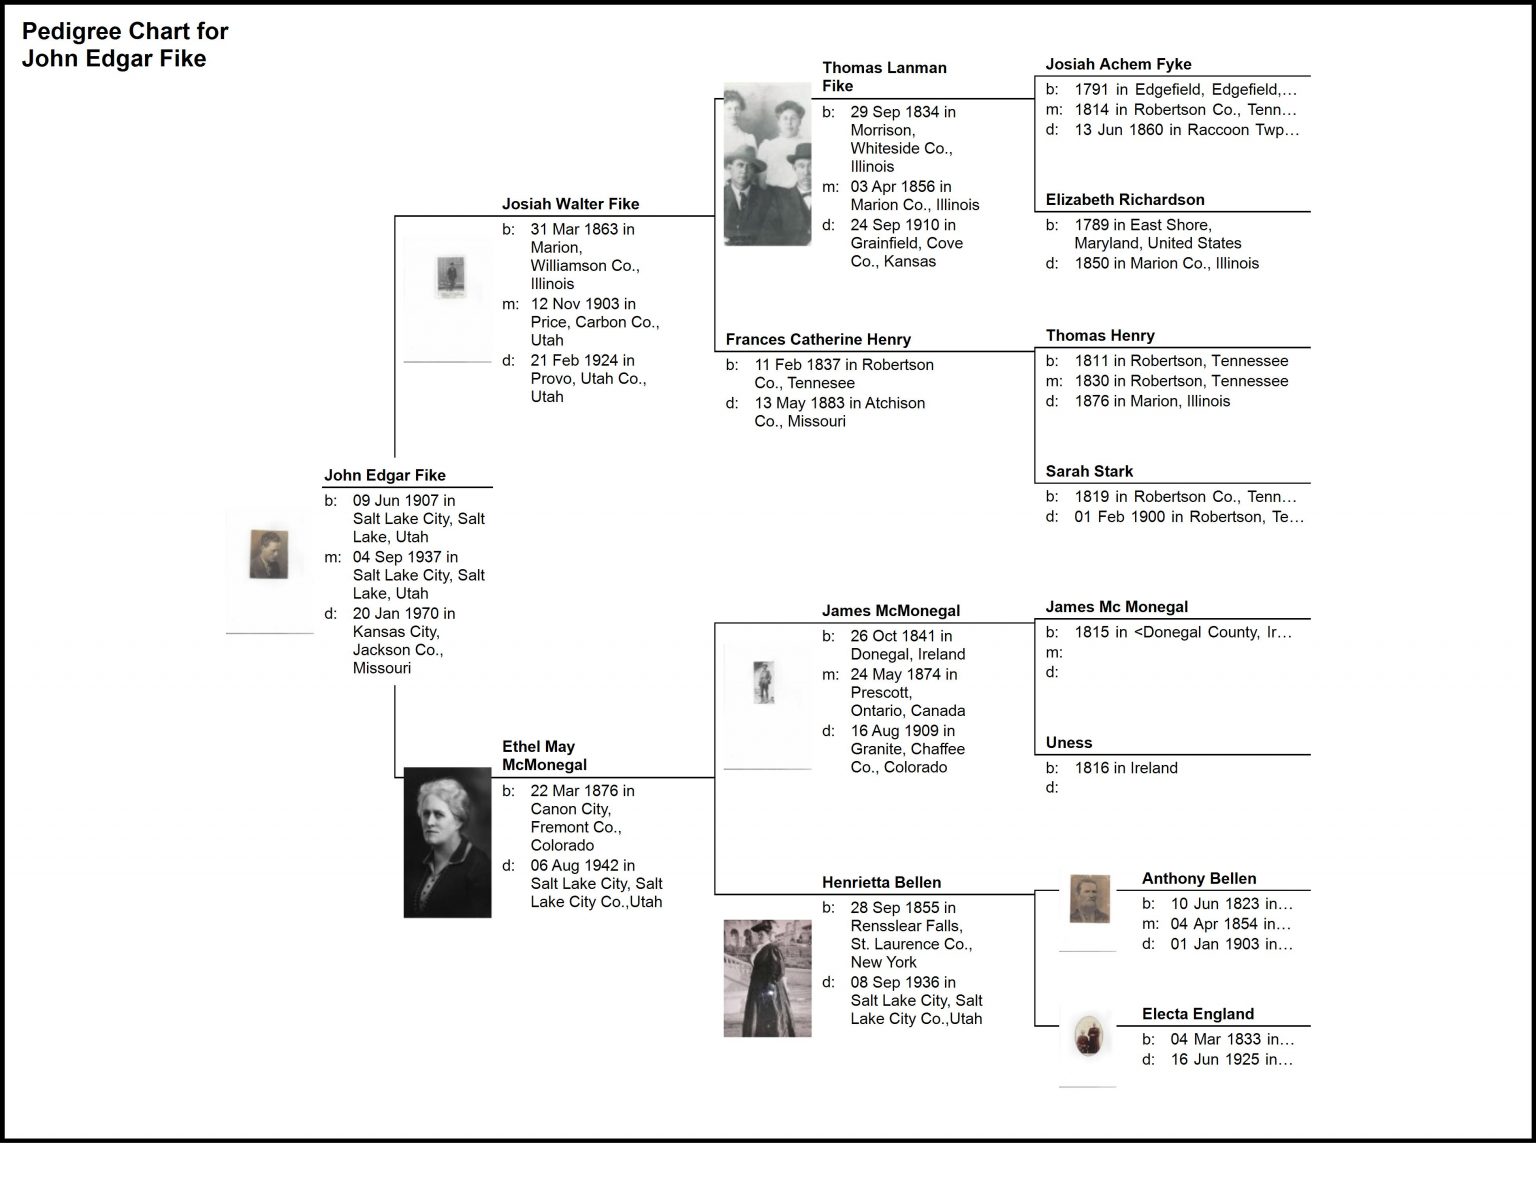 Fike – Fike and Townsend Family History